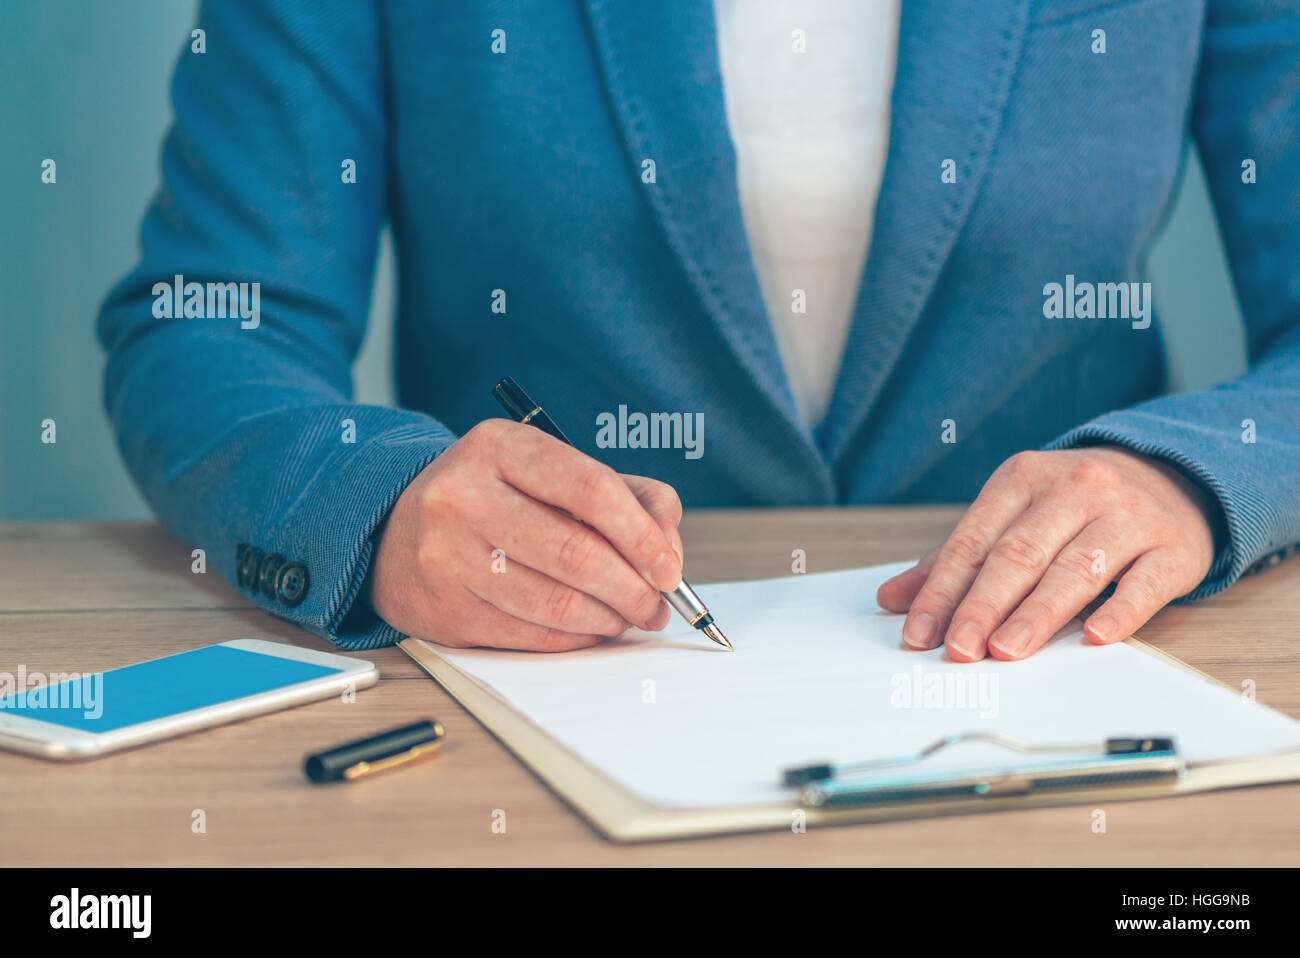 Businesswoman signing business contract agreement at office desk Stock Photo